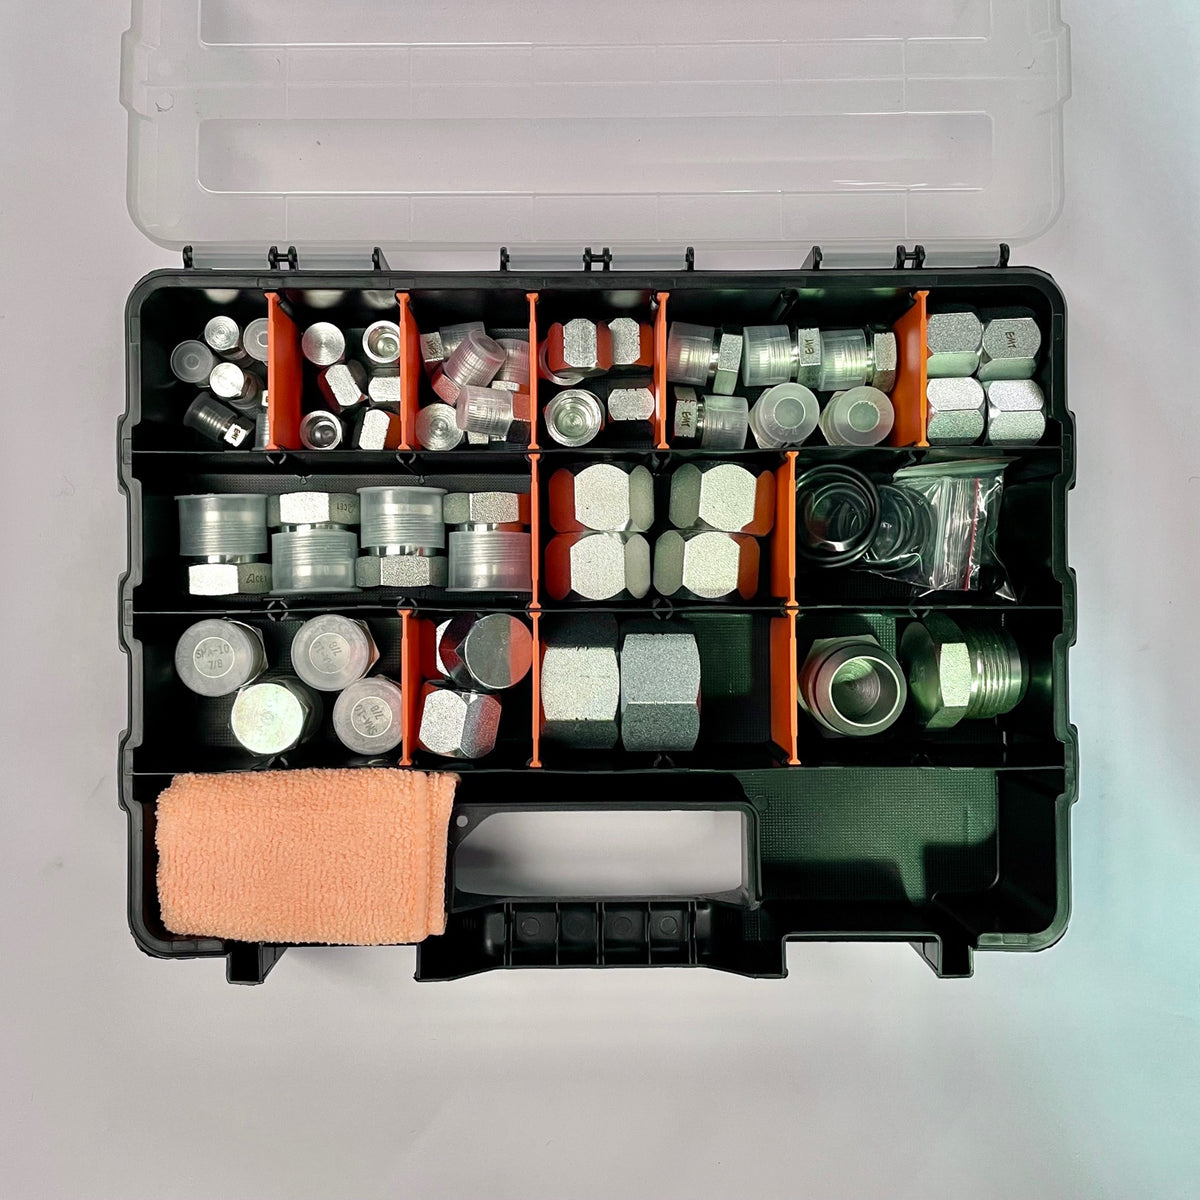 Layout of 7 different sizes of Steel JIC Plugs, Caps &amp; Nitrile O-Rings in a Plastic Parts tray  92 pieces in total JIC Plugs and Caps are used stop hydraulic oil leaks and external contamination during hydraulic equipment maintenance and repair